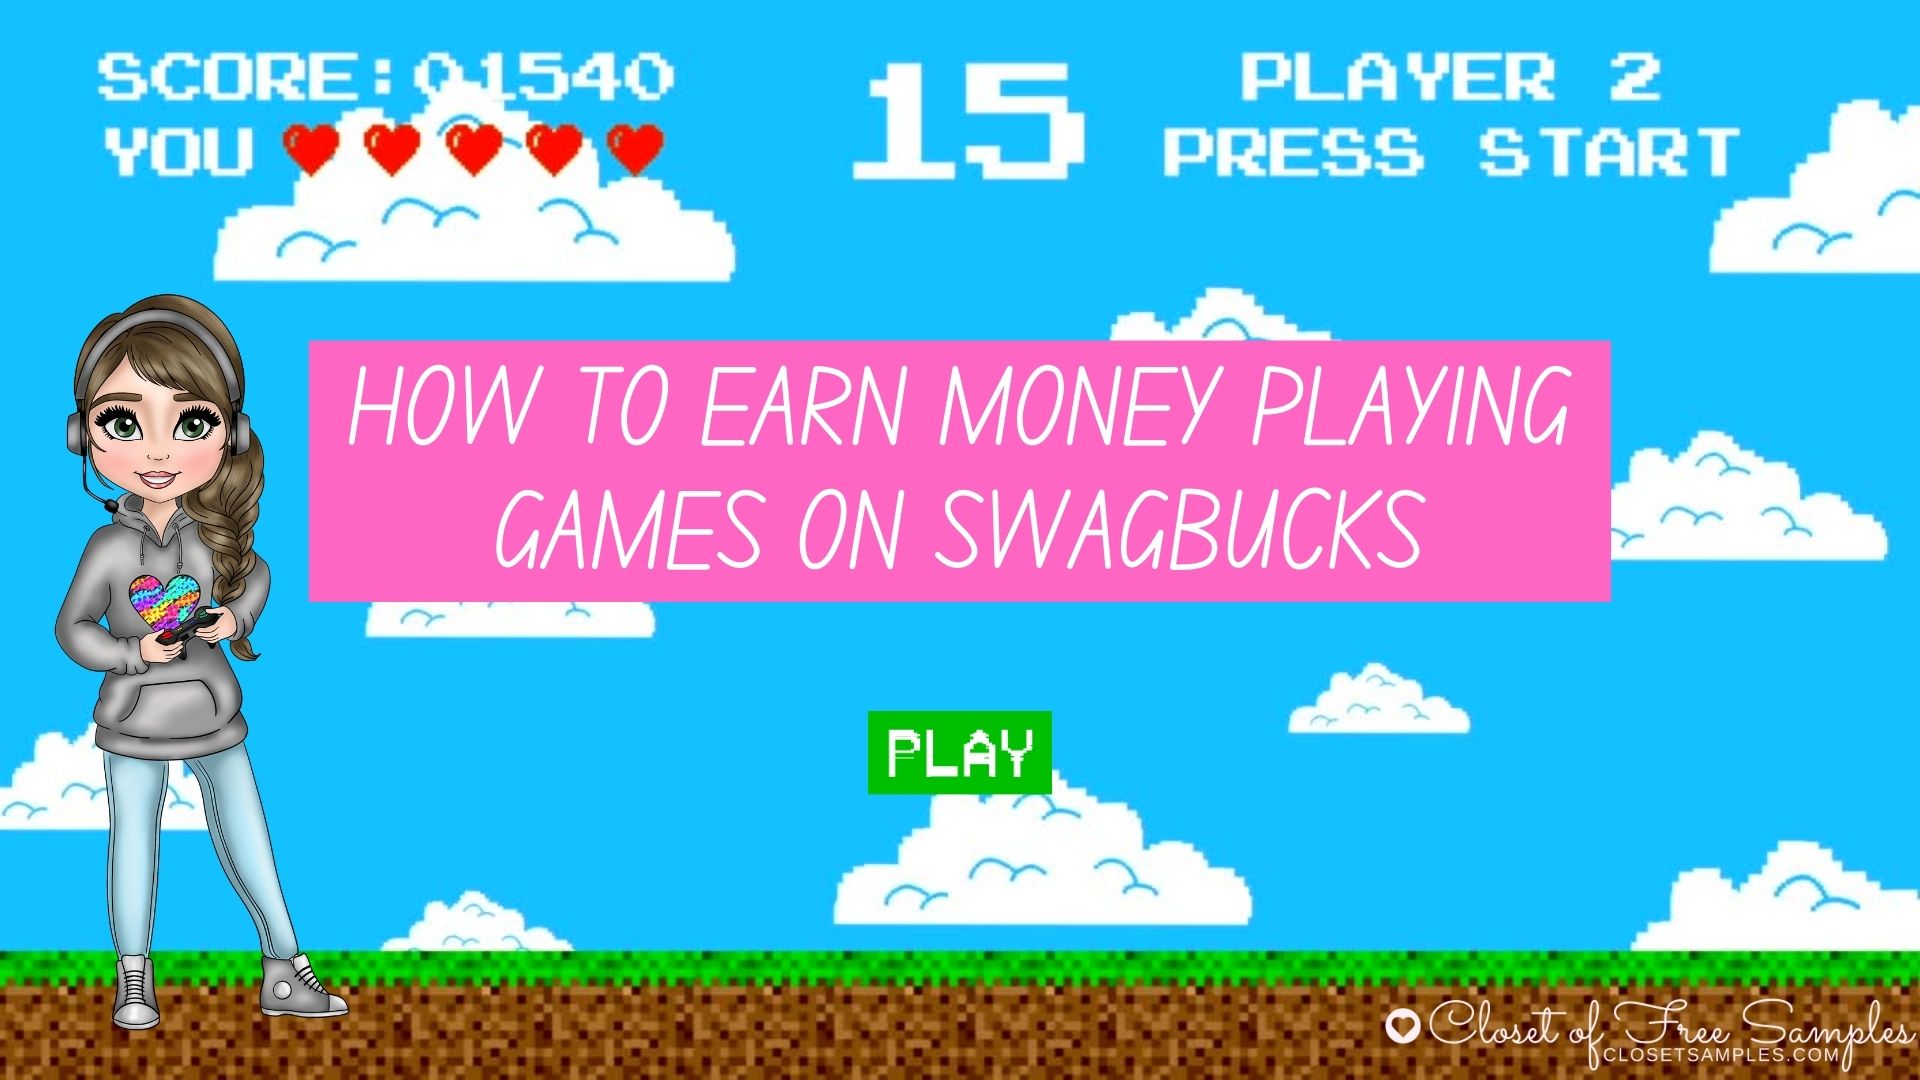 How to Earn Money Playing Games on Swagbucks closetsamples